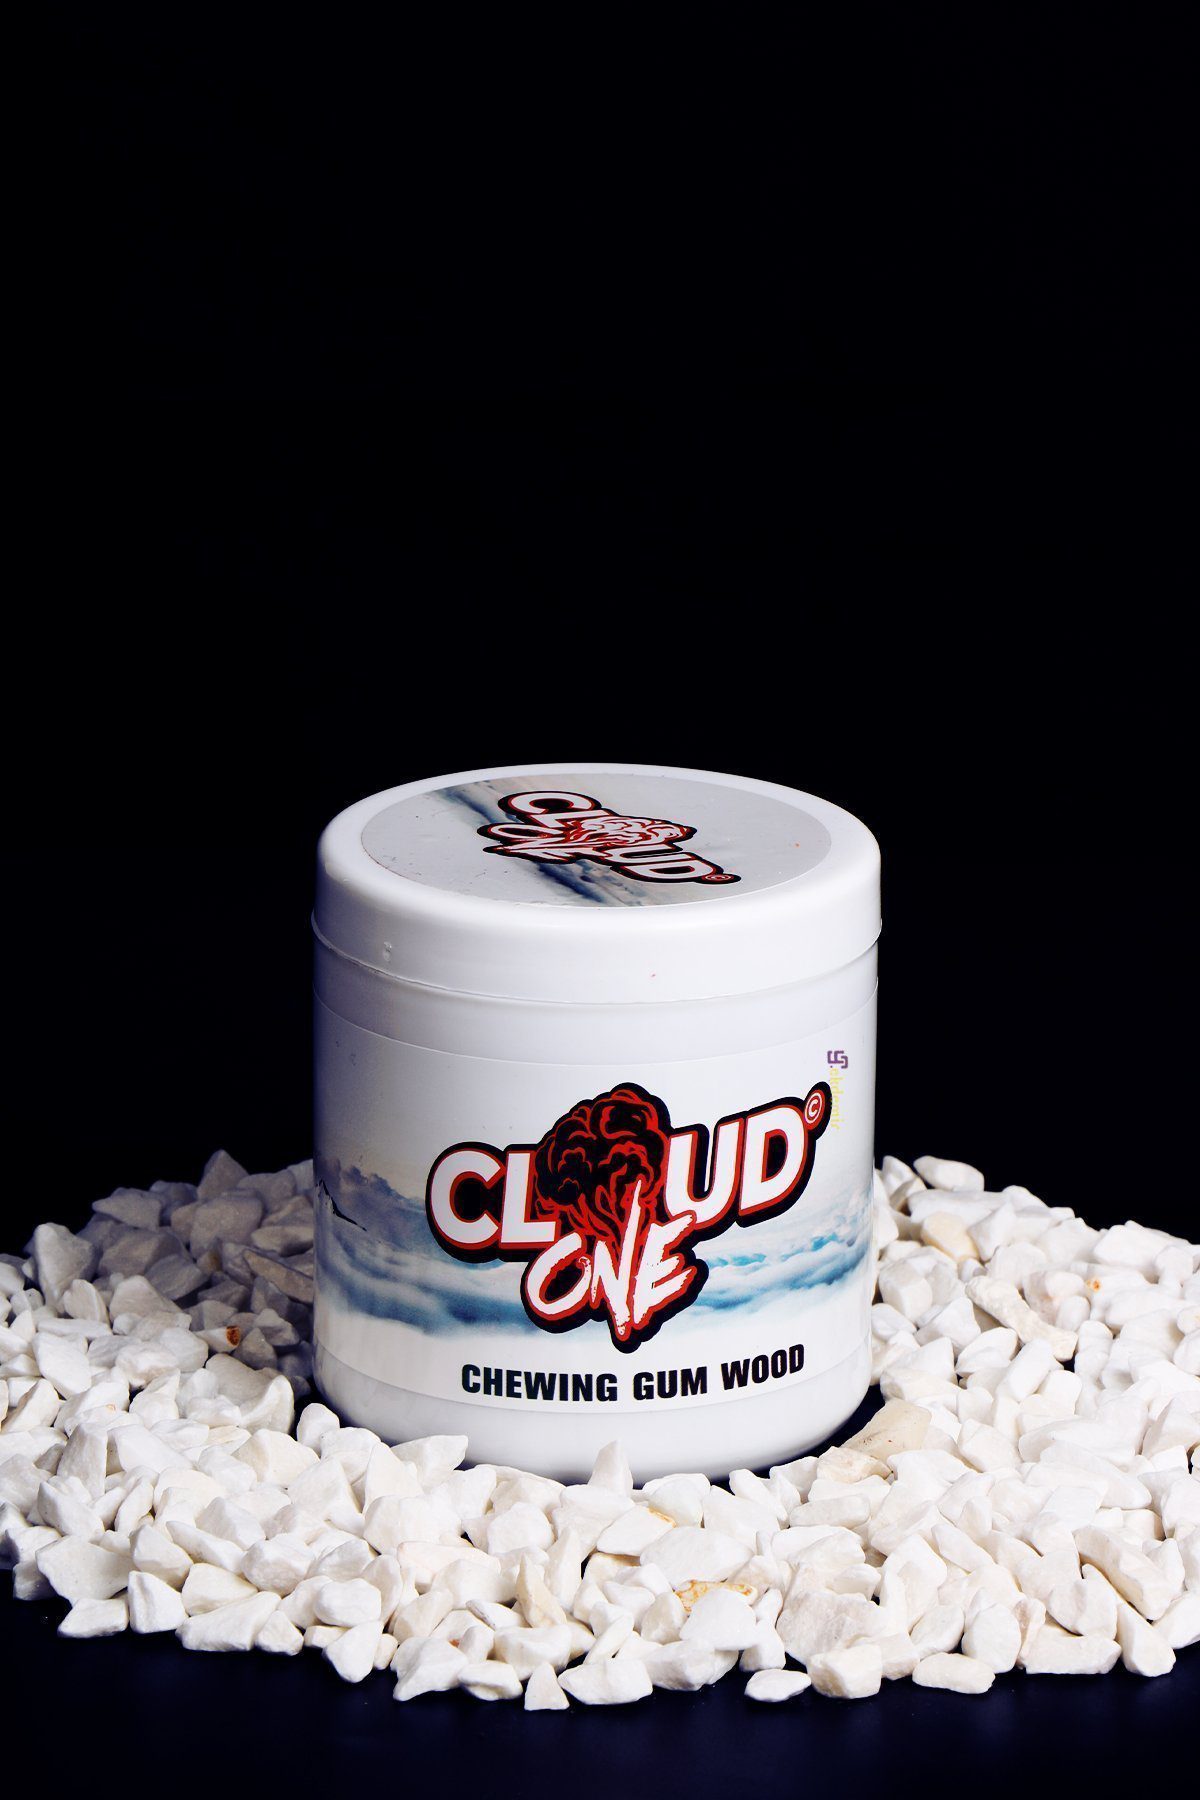 CLOUD ONE CHEWİNG GUM WOOD